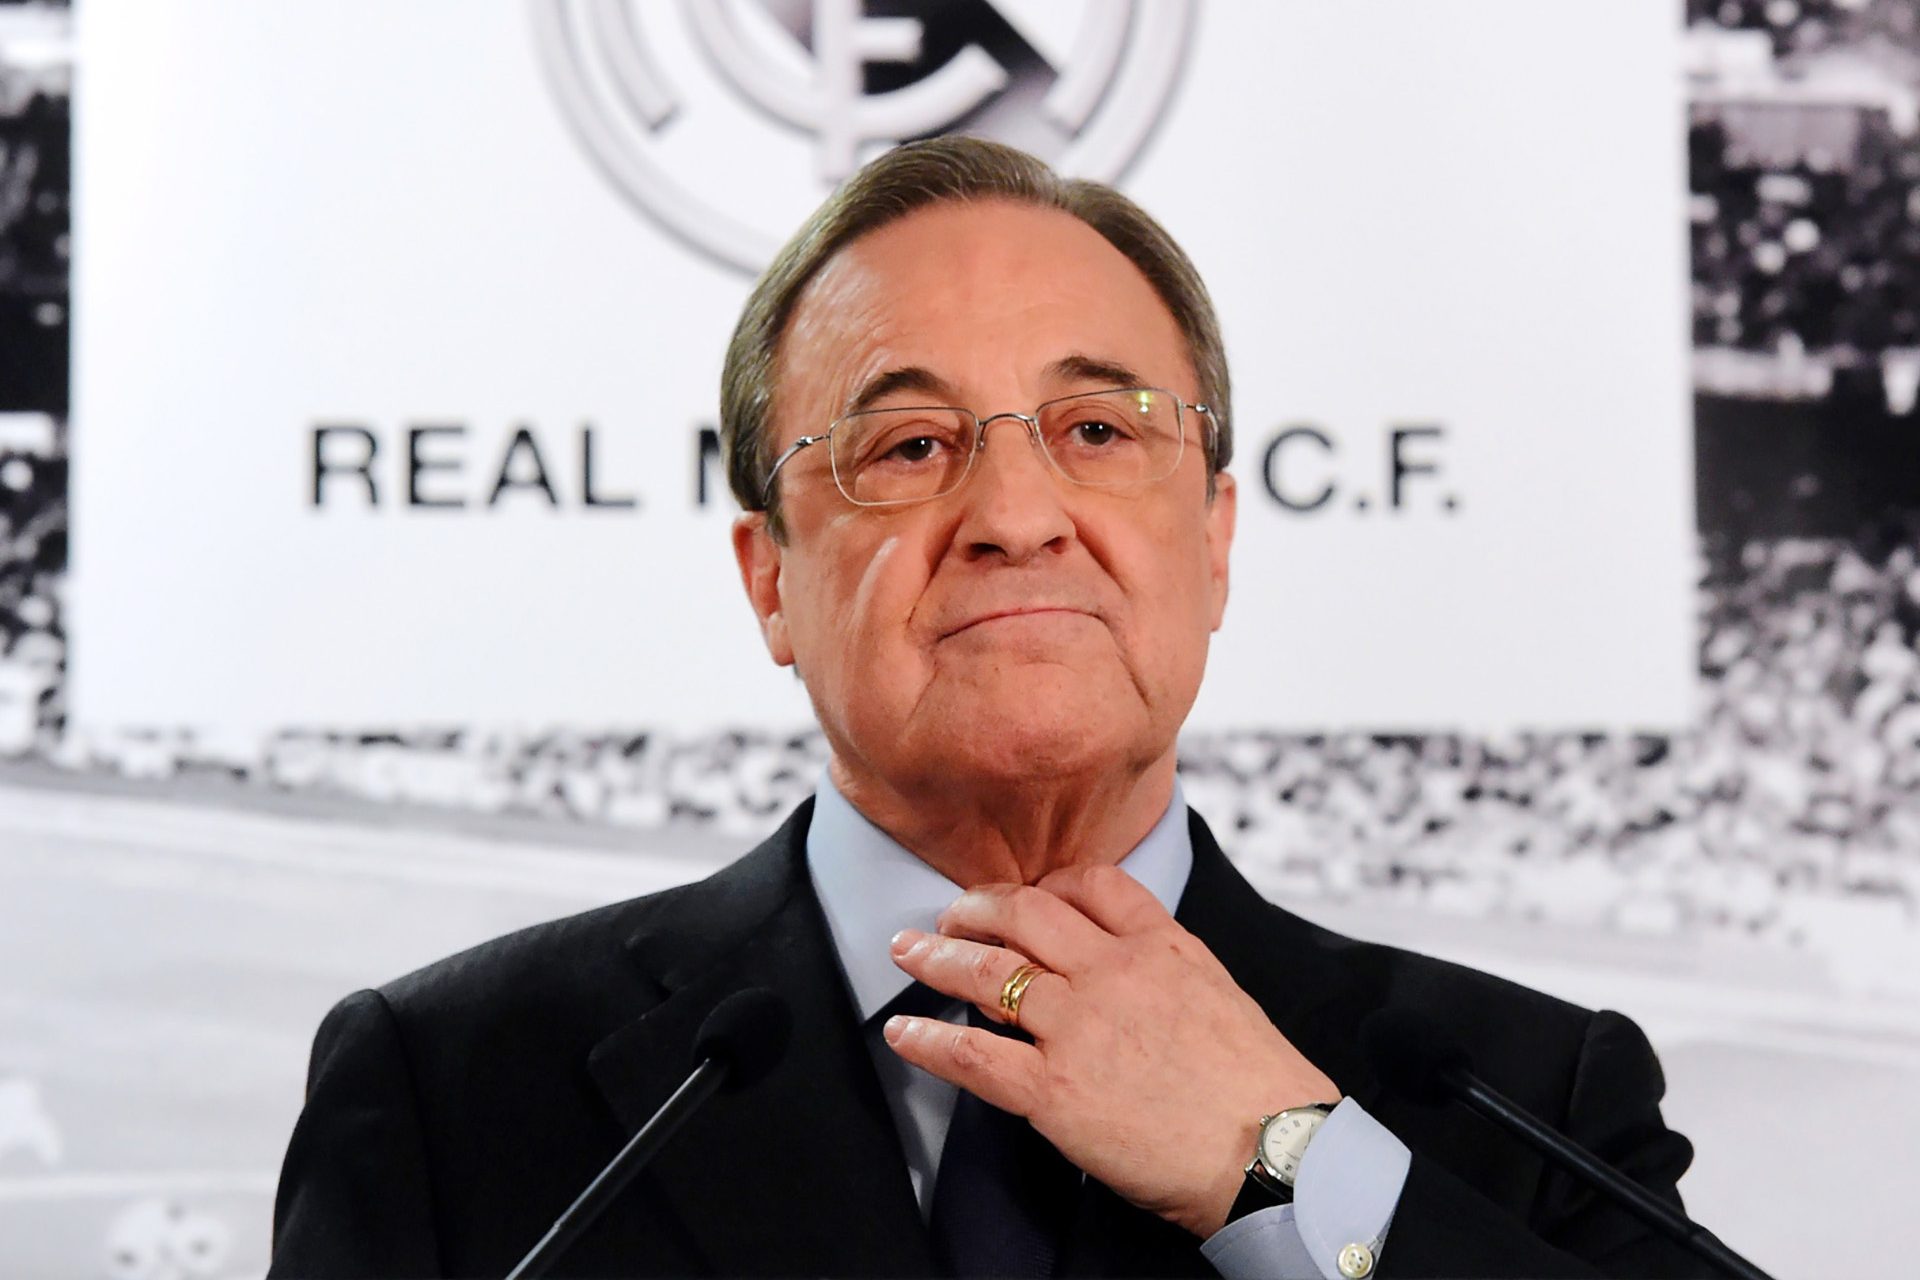 The next £110m superstar Florentino Perez wants to bring to Real Madrid